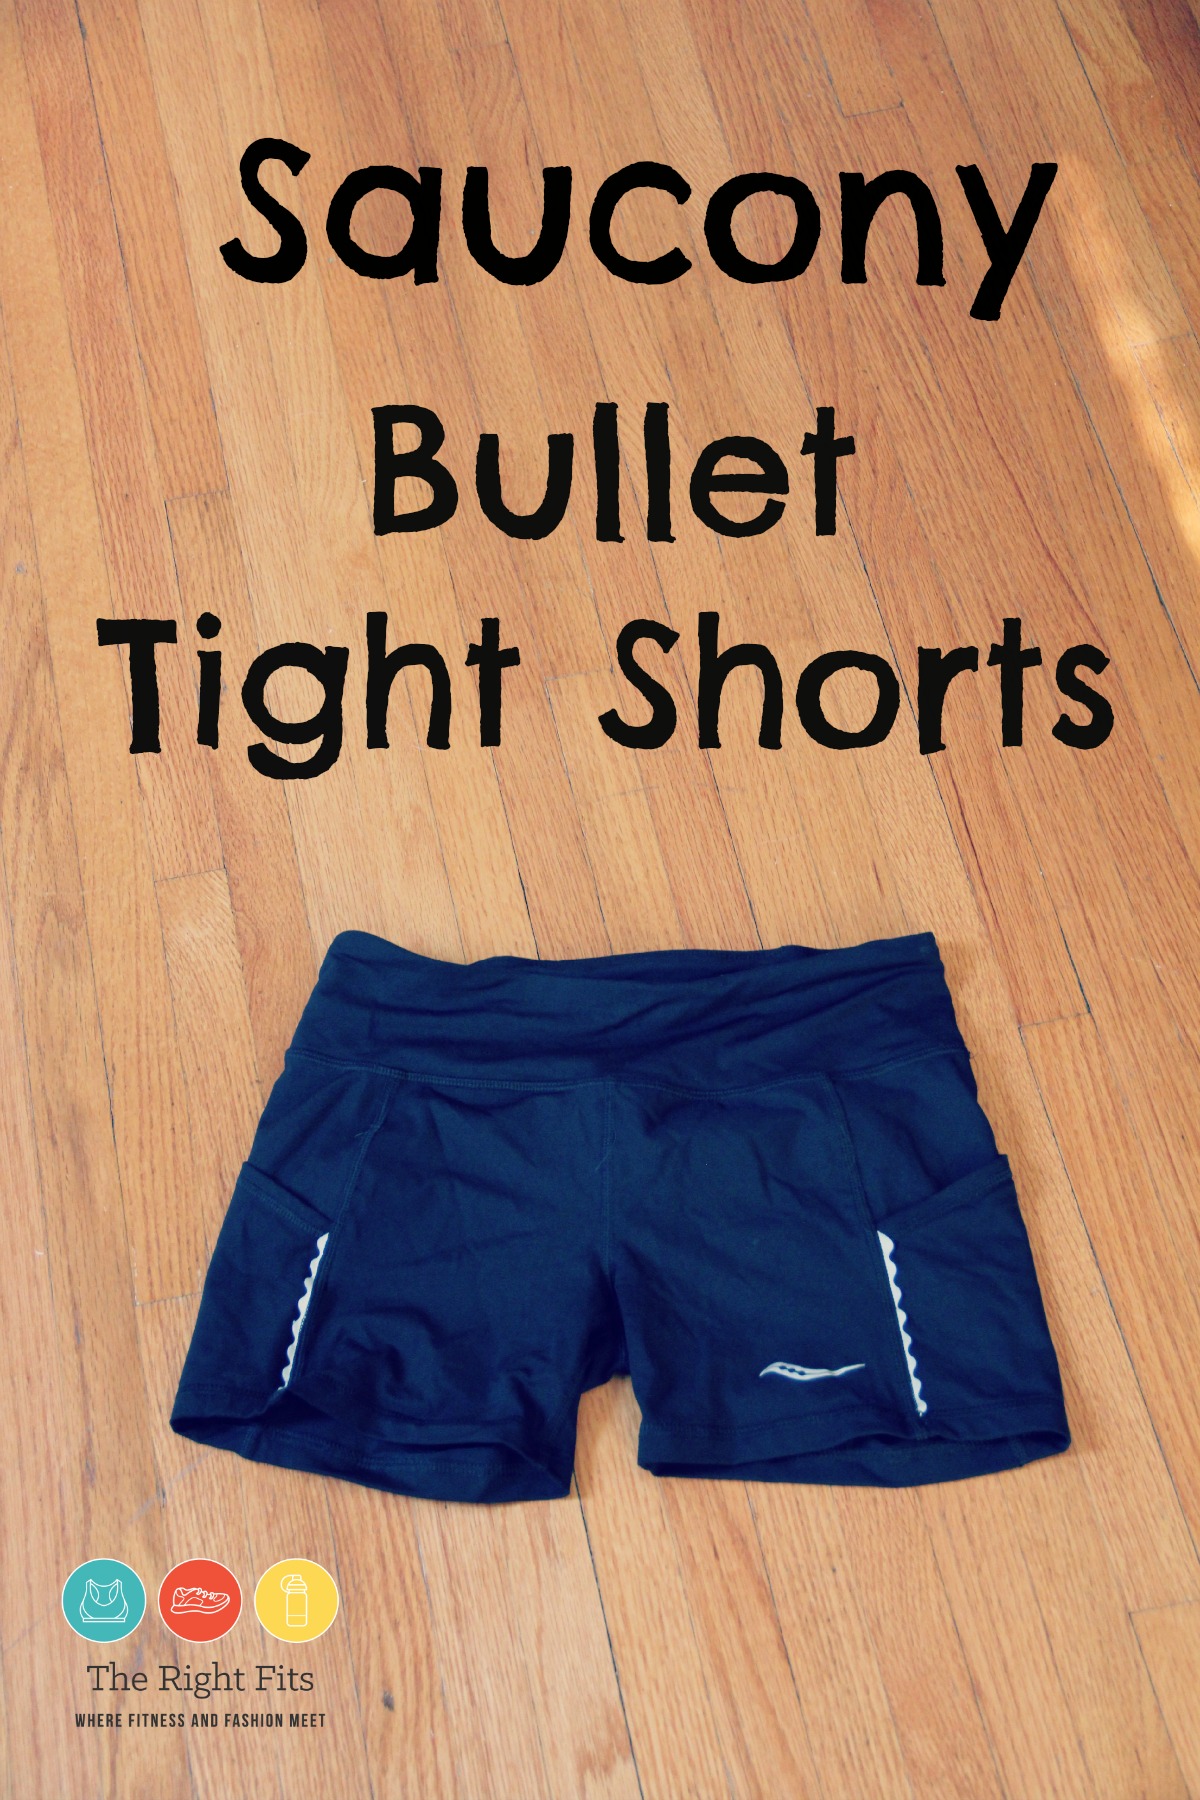 The Saucony Bullet Tight Shorts